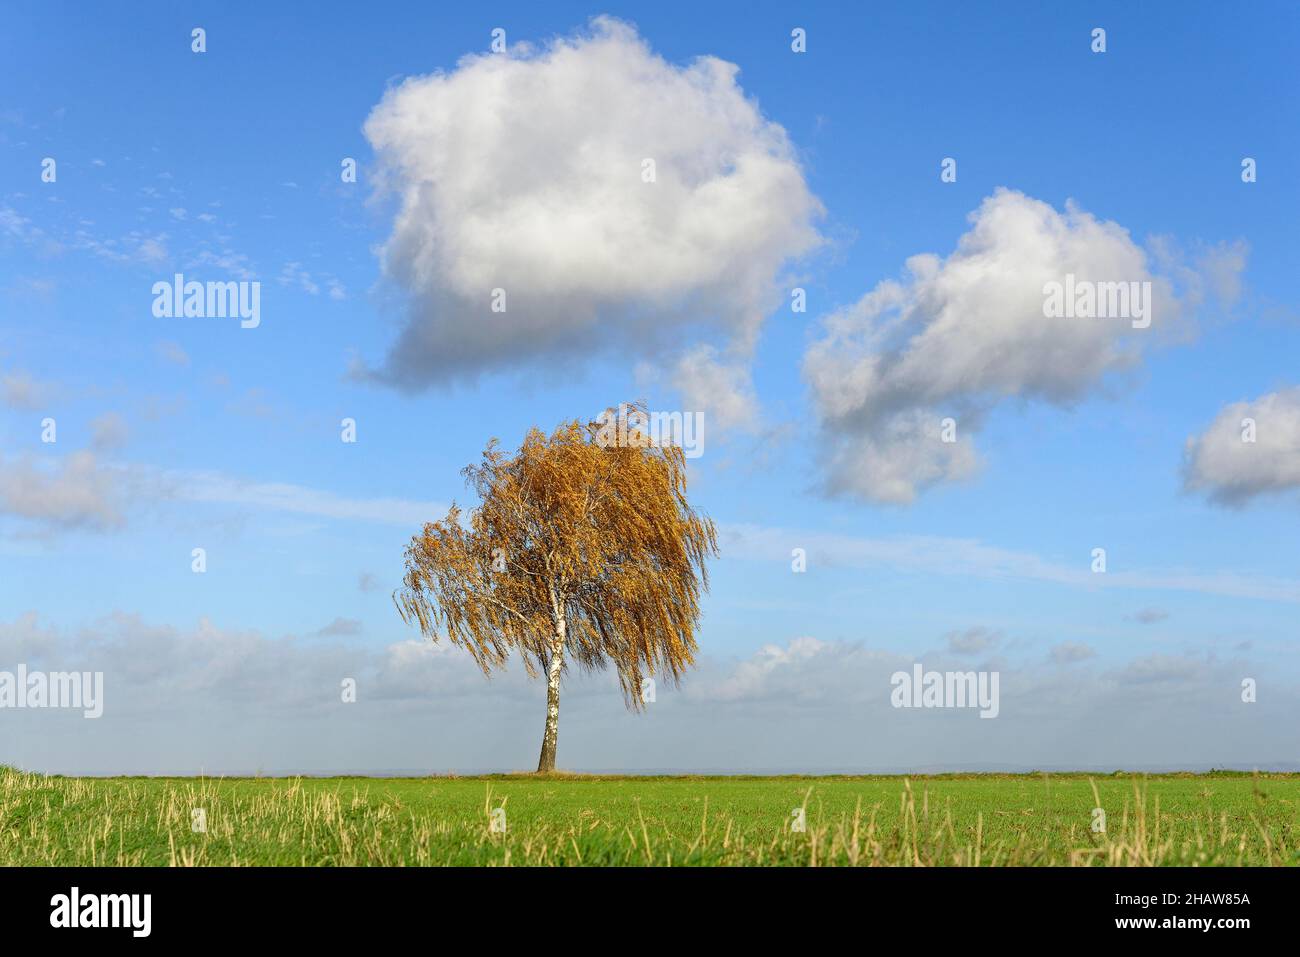 Birch (Betula), solitary tree in a field, blue sky with clouds (cumulus), North Rhine-Westphalia, Germany Stock Photo